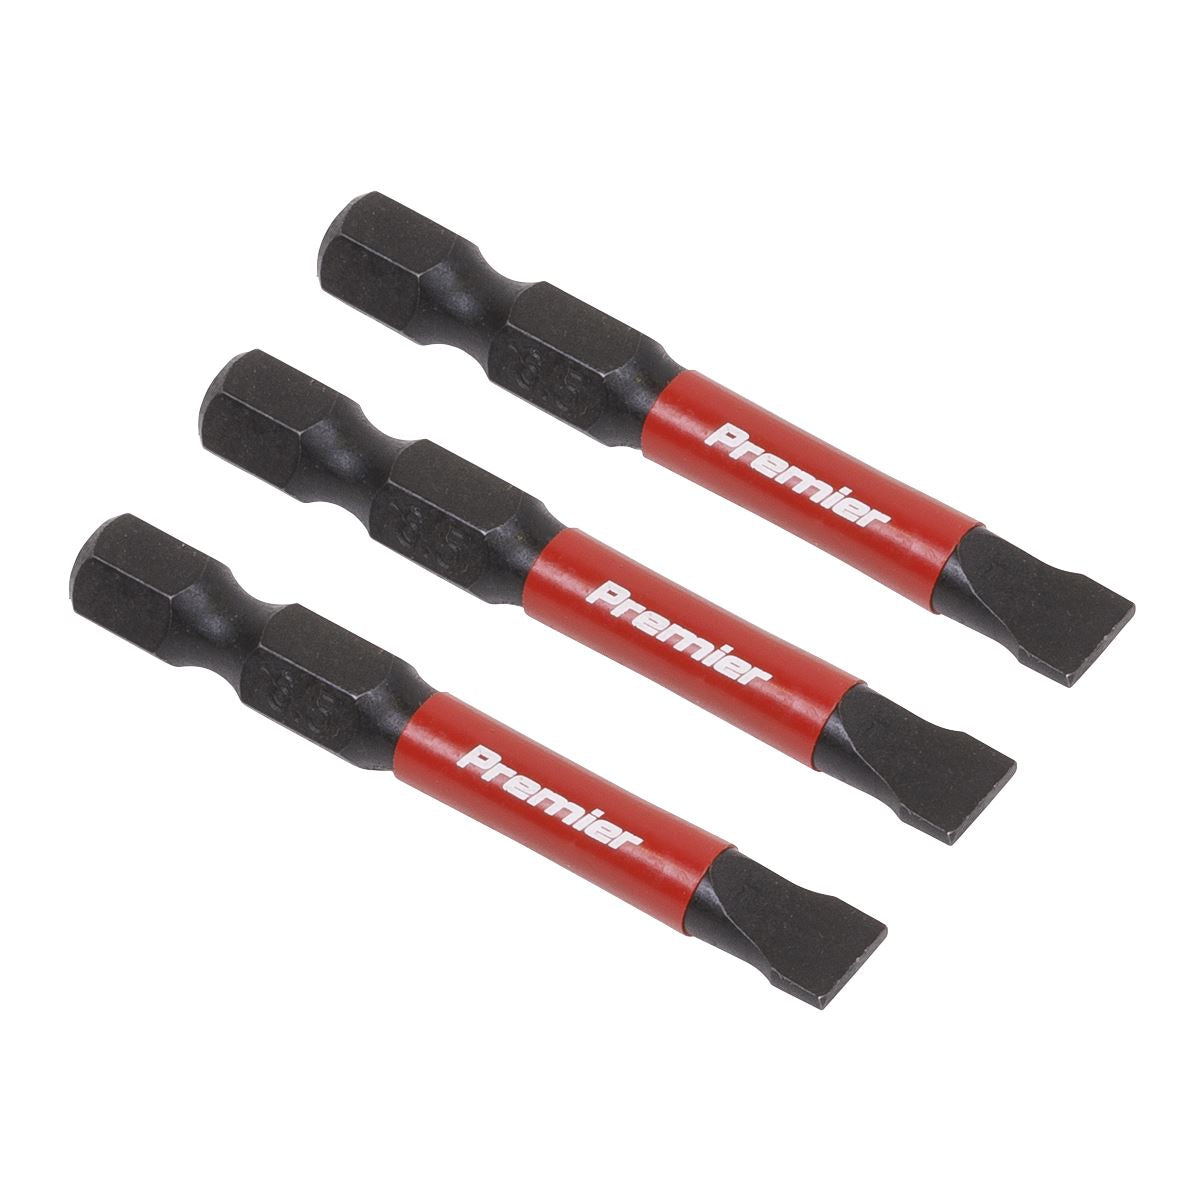 Sealey Premier Slotted 6.5mm Impact Power Tool Bits 50mm - 3pc